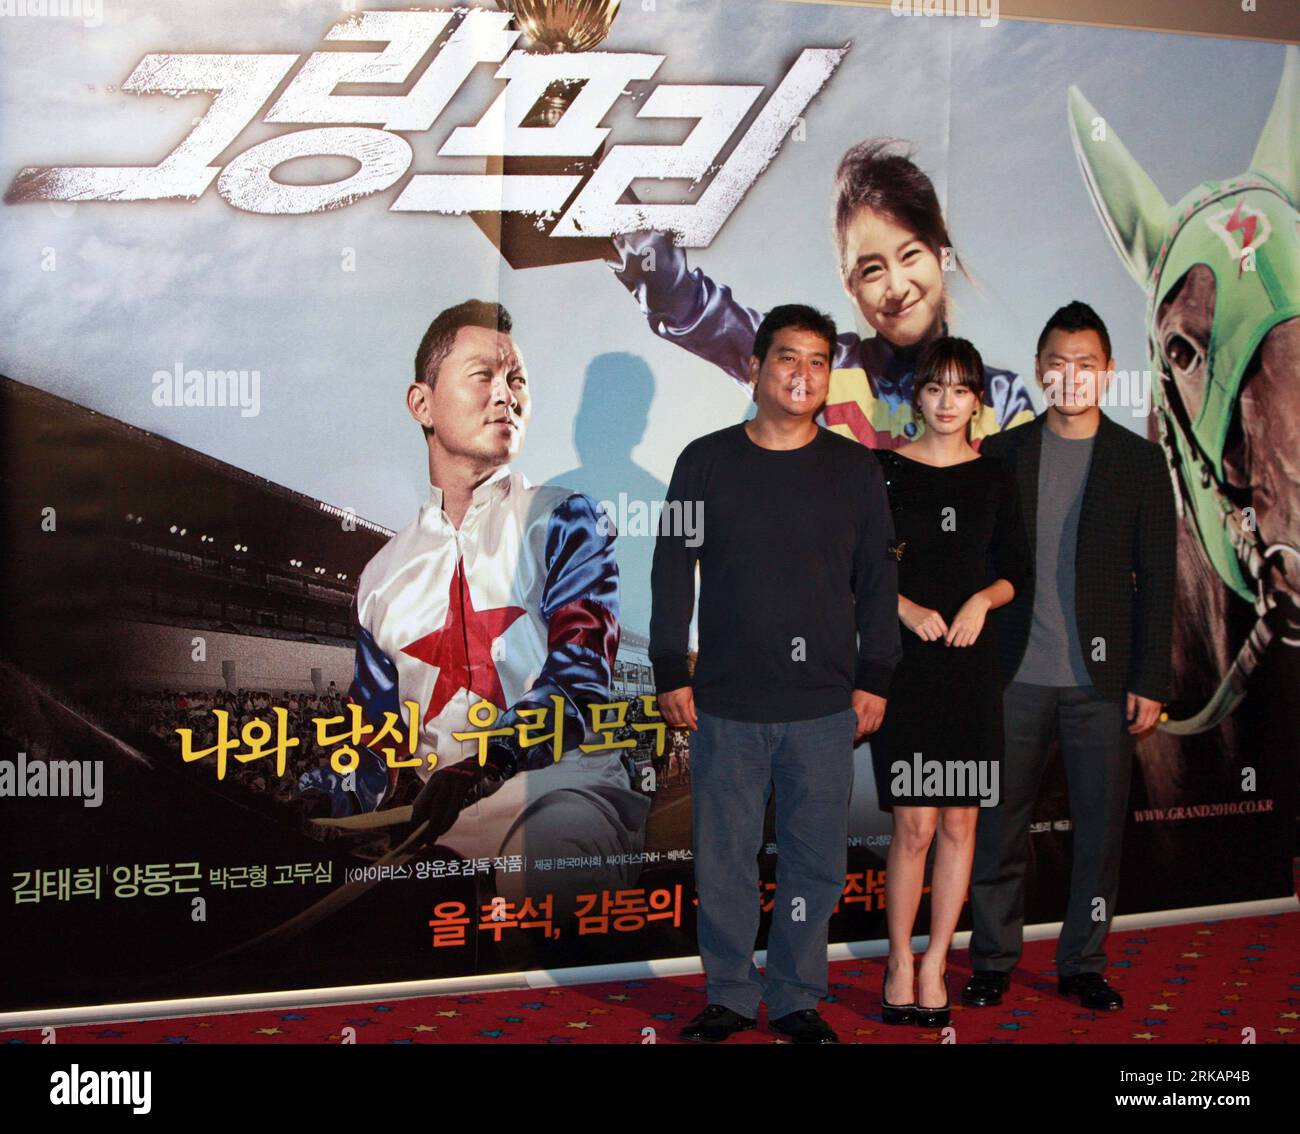 Bildnummer: 54411005  Datum: 07.09.2010  Copyright: imago/Xinhua (100907) -- SEOUL, Sept. 7, 2010 (Xinhua) -- Director Yang Yun Ho (L), leading actress Kim Tae Hee (C) and leading actor Yang Dong-Geun of the movie Grand Prix attend the trial show of the movie in Seoul, capital of South Korea, on Sept. 7, 2010. (Xinhua/He Lulu) (zcq) SOUTH KOREA-SEOUL-MOVIE PUBLICATIONxNOTxINxCHN People Film kbdig xcb 2010 quadrat     Bildnummer 54411005 Date 07 09 2010 Copyright Imago XINHUA  Seoul Sept 7 2010 XINHUA Director Yang Yun Ho l Leading actress Kim Tae Hee C and Leading Actor Yang Dong Geun of The M Stock Photo